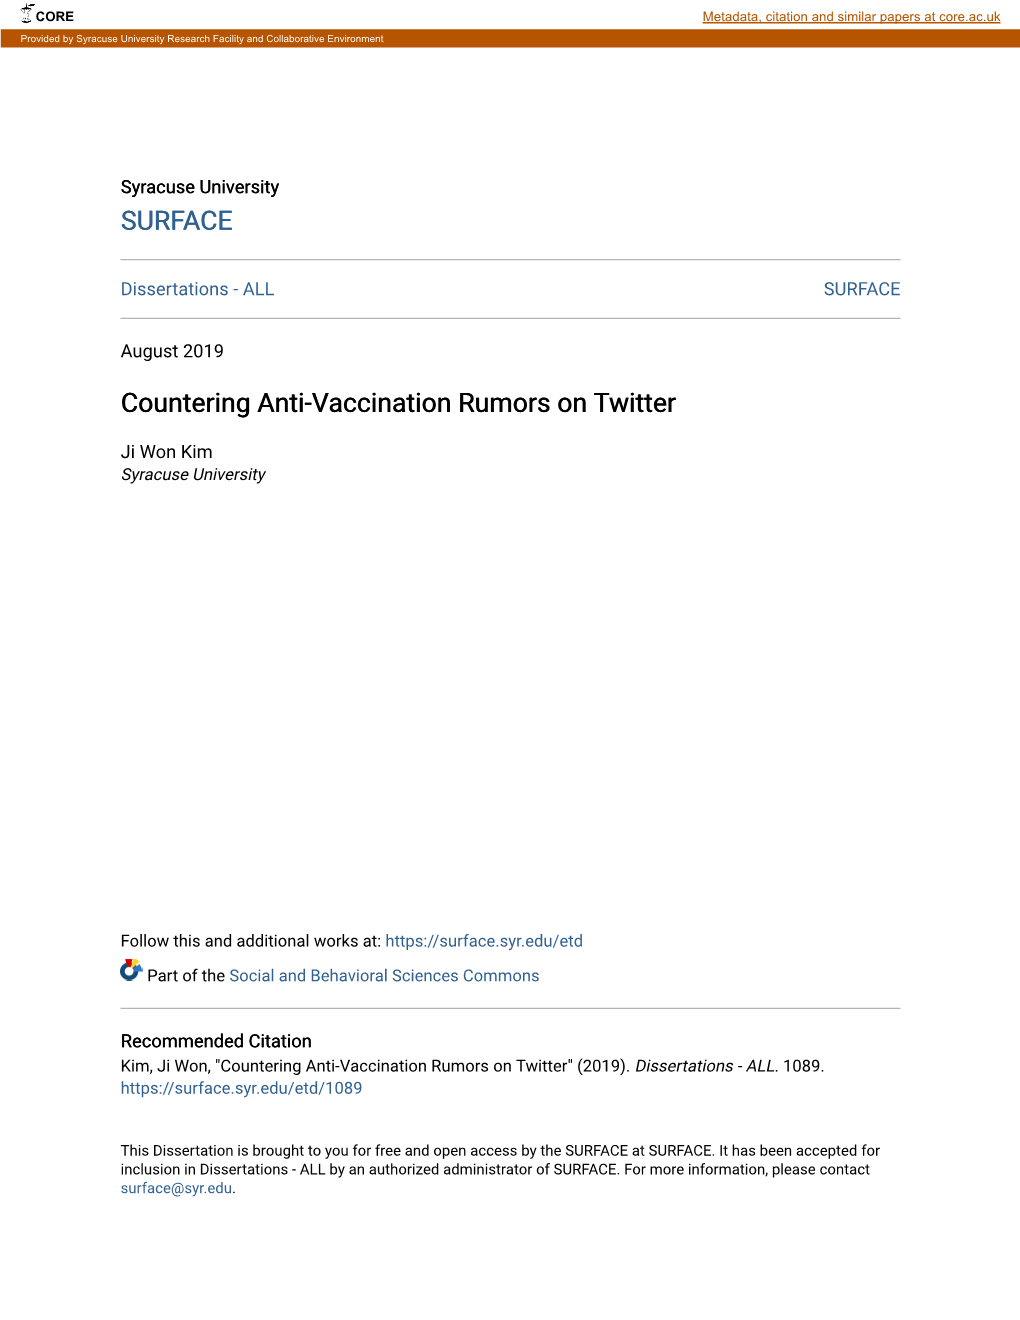 Countering Anti-Vaccination Rumors on Twitter